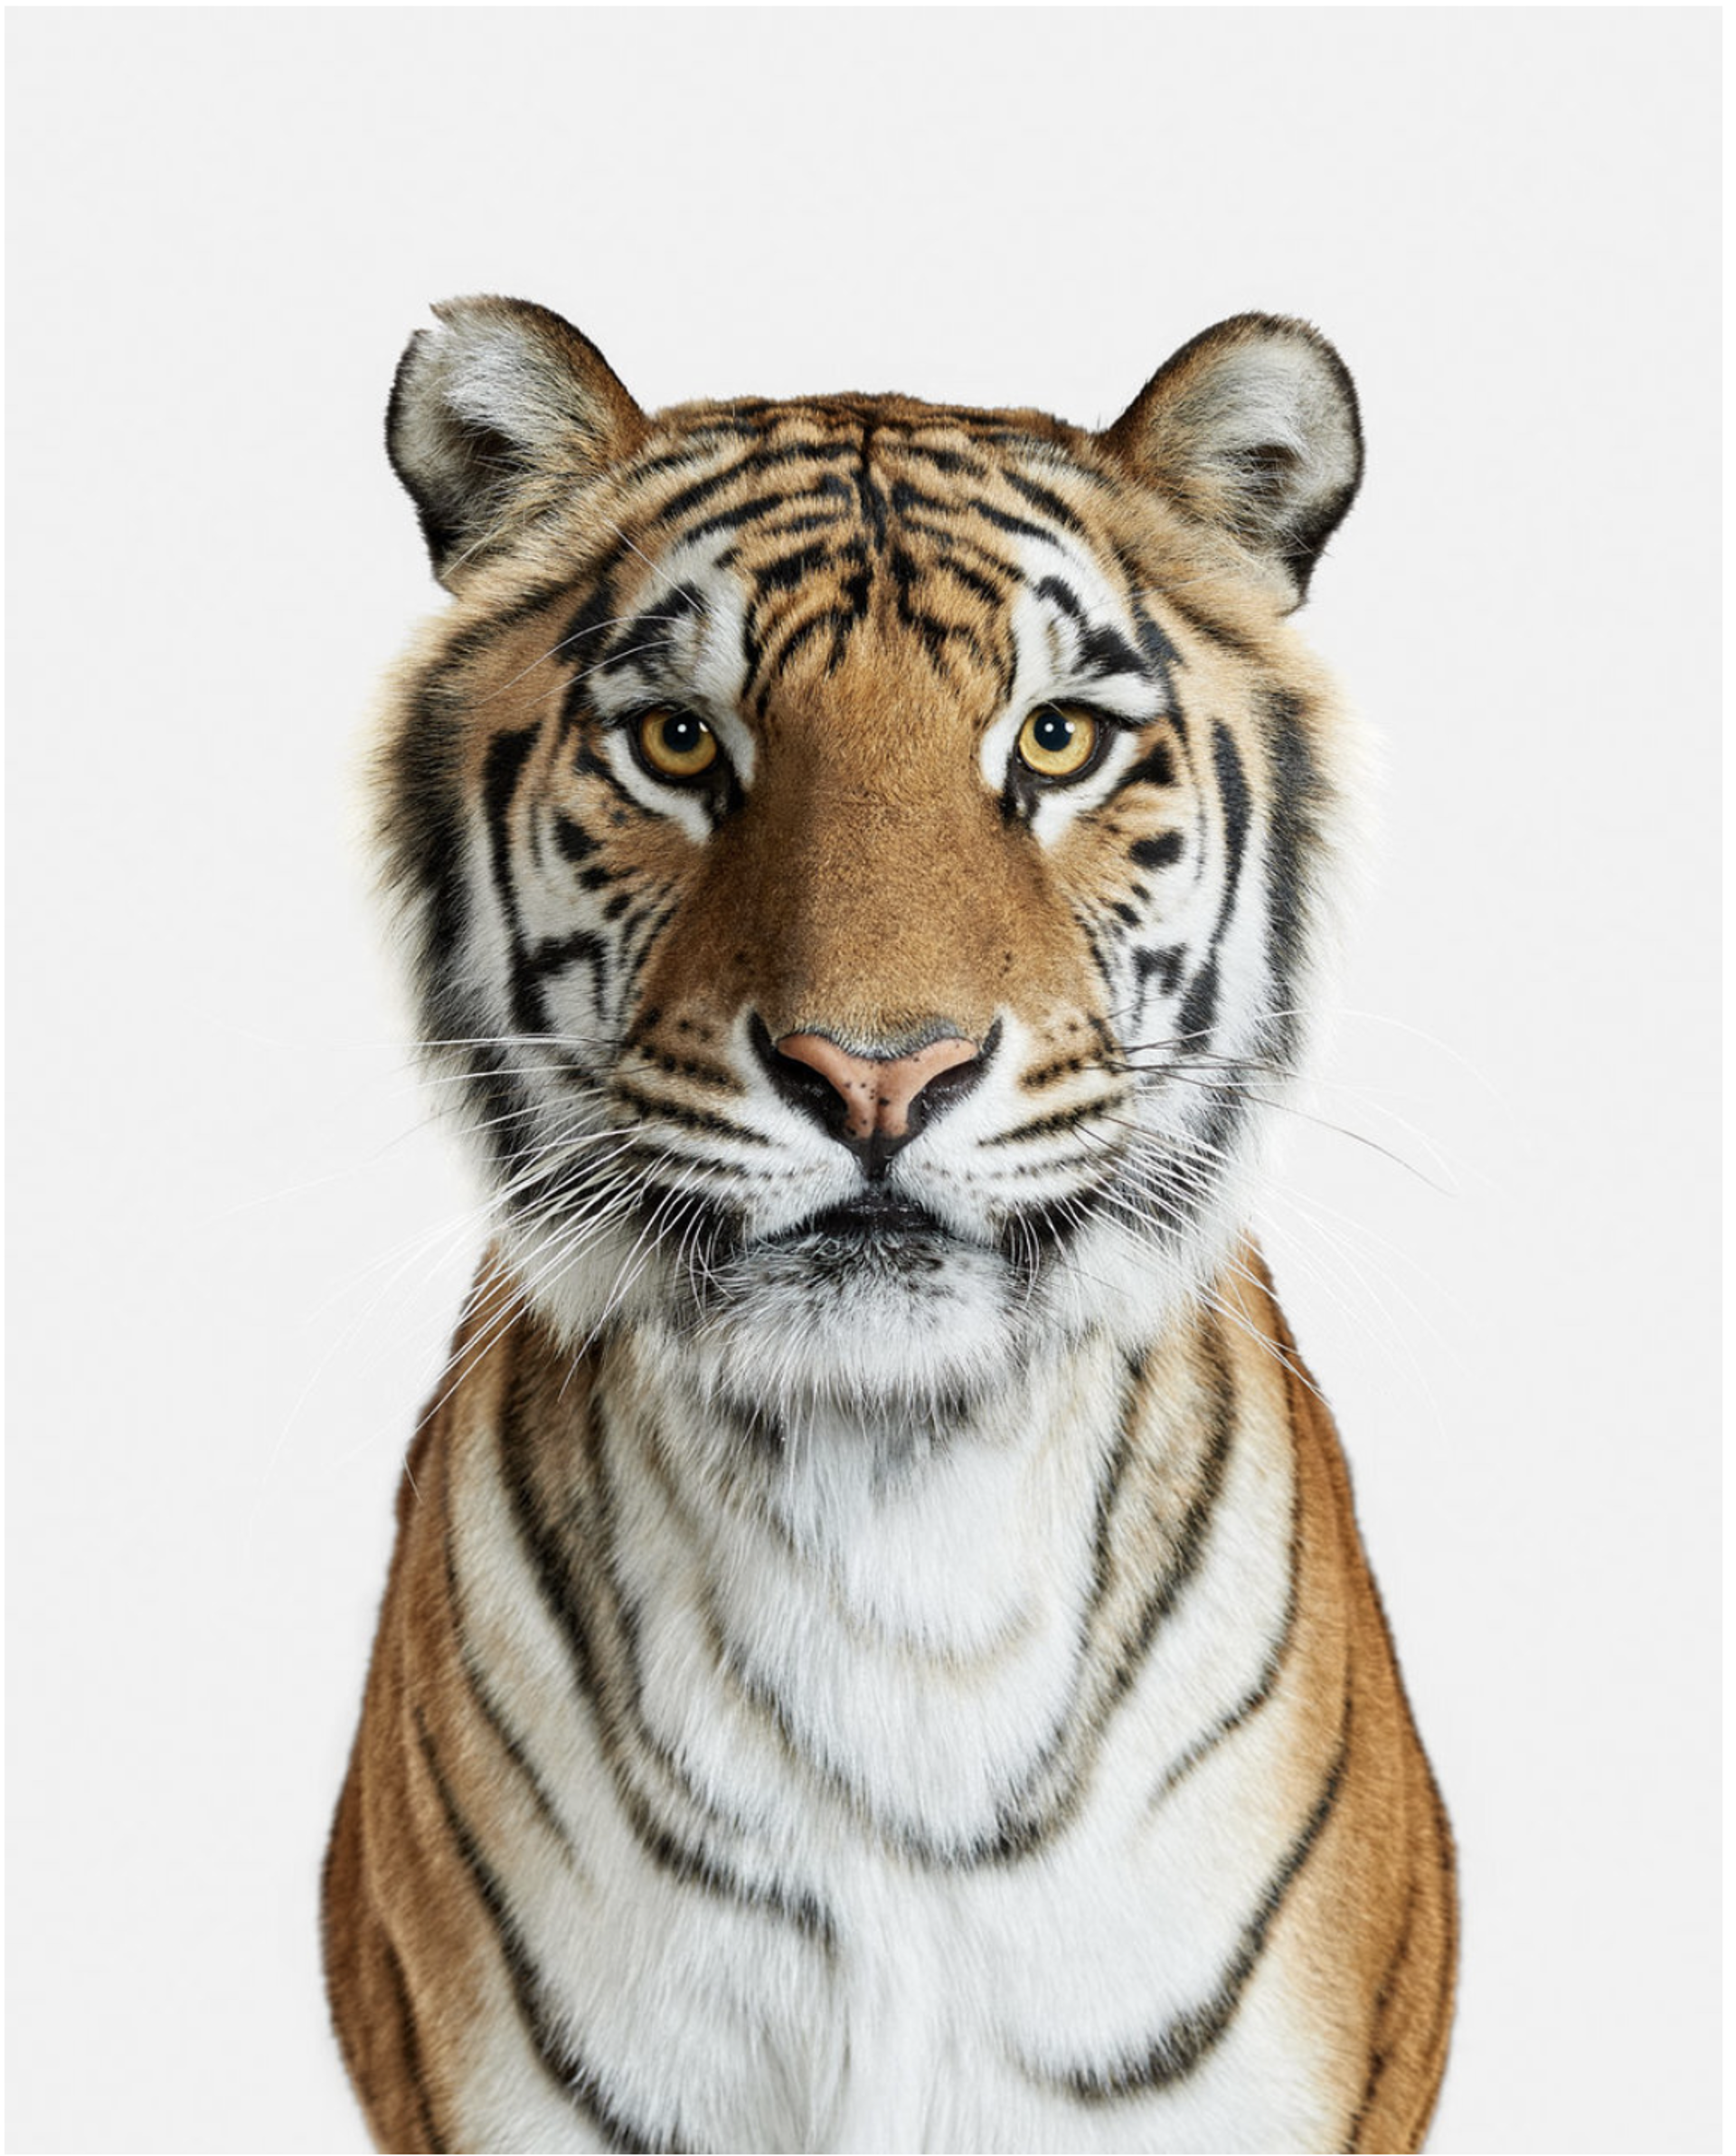 Bengal Tiger No. 1 by Randal Ford